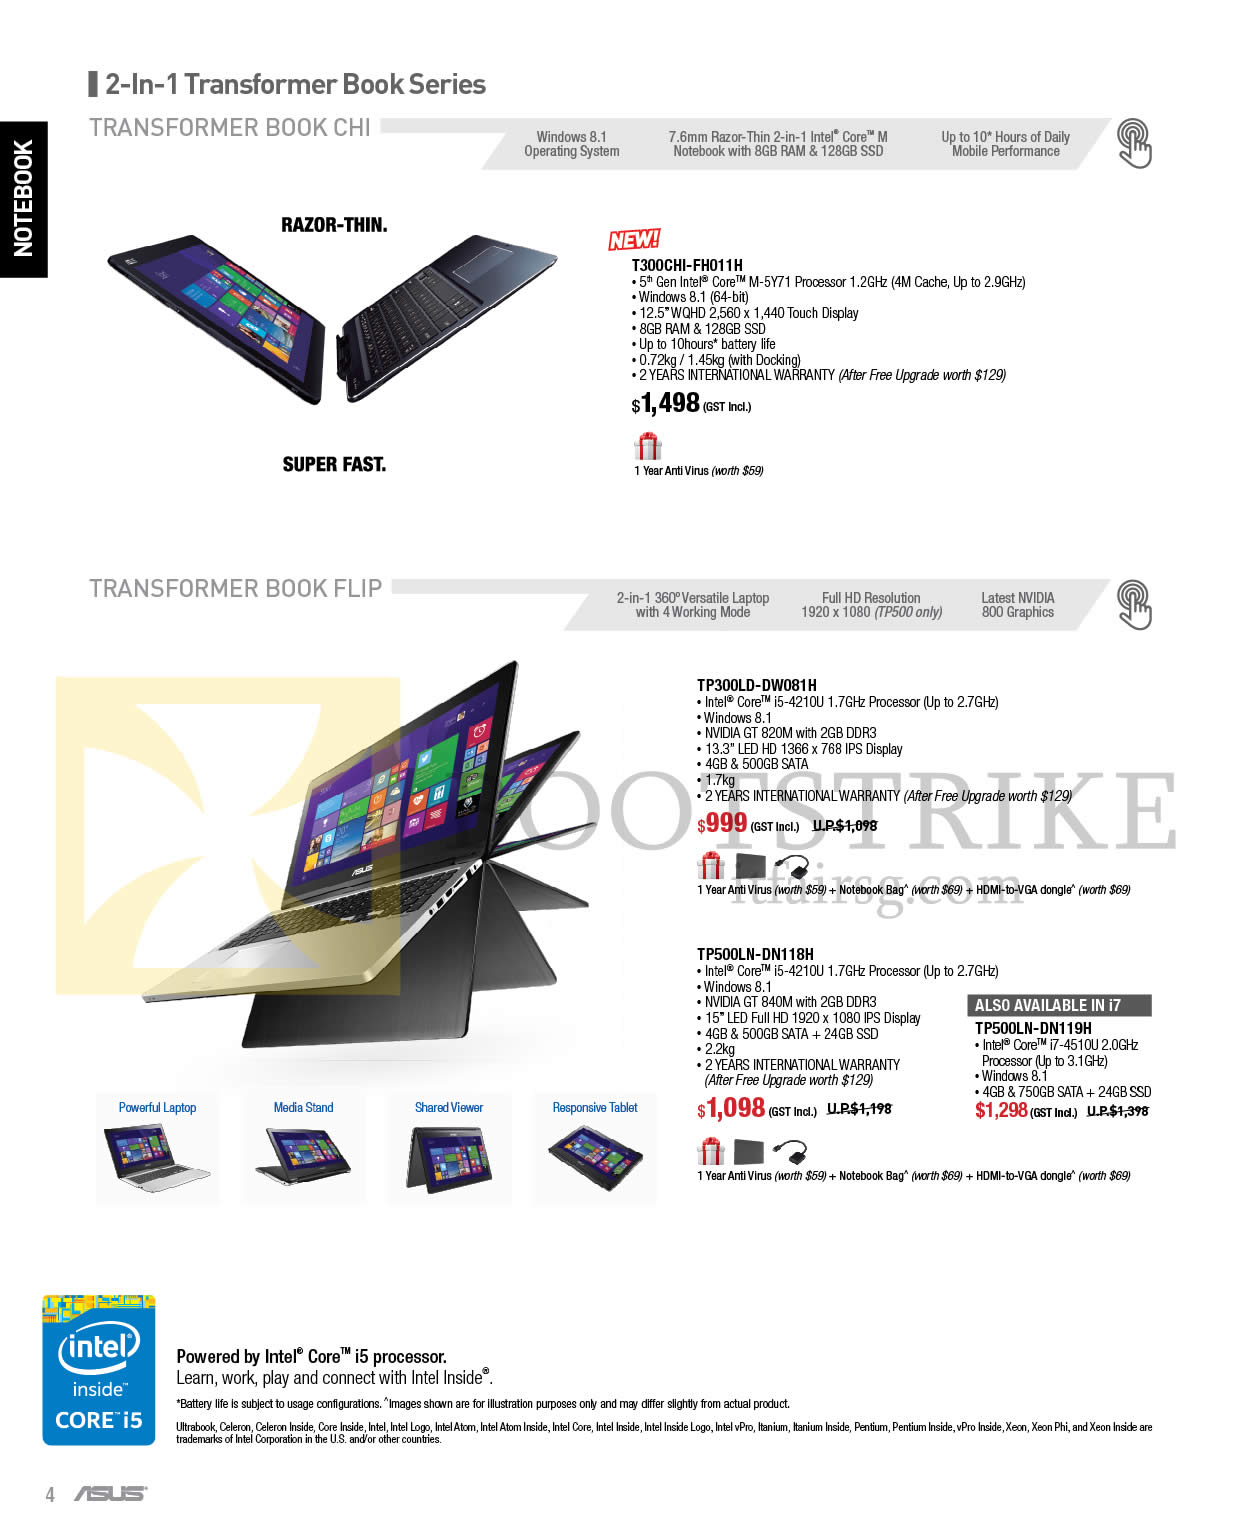 IT SHOW 2015 price list image brochure of ASUS Notebooks Transformer Book Chi, Flip, T300CHI-FH011H, TP300LD-DW081H, TP500LN-DN118H, TP500LN-DN119H